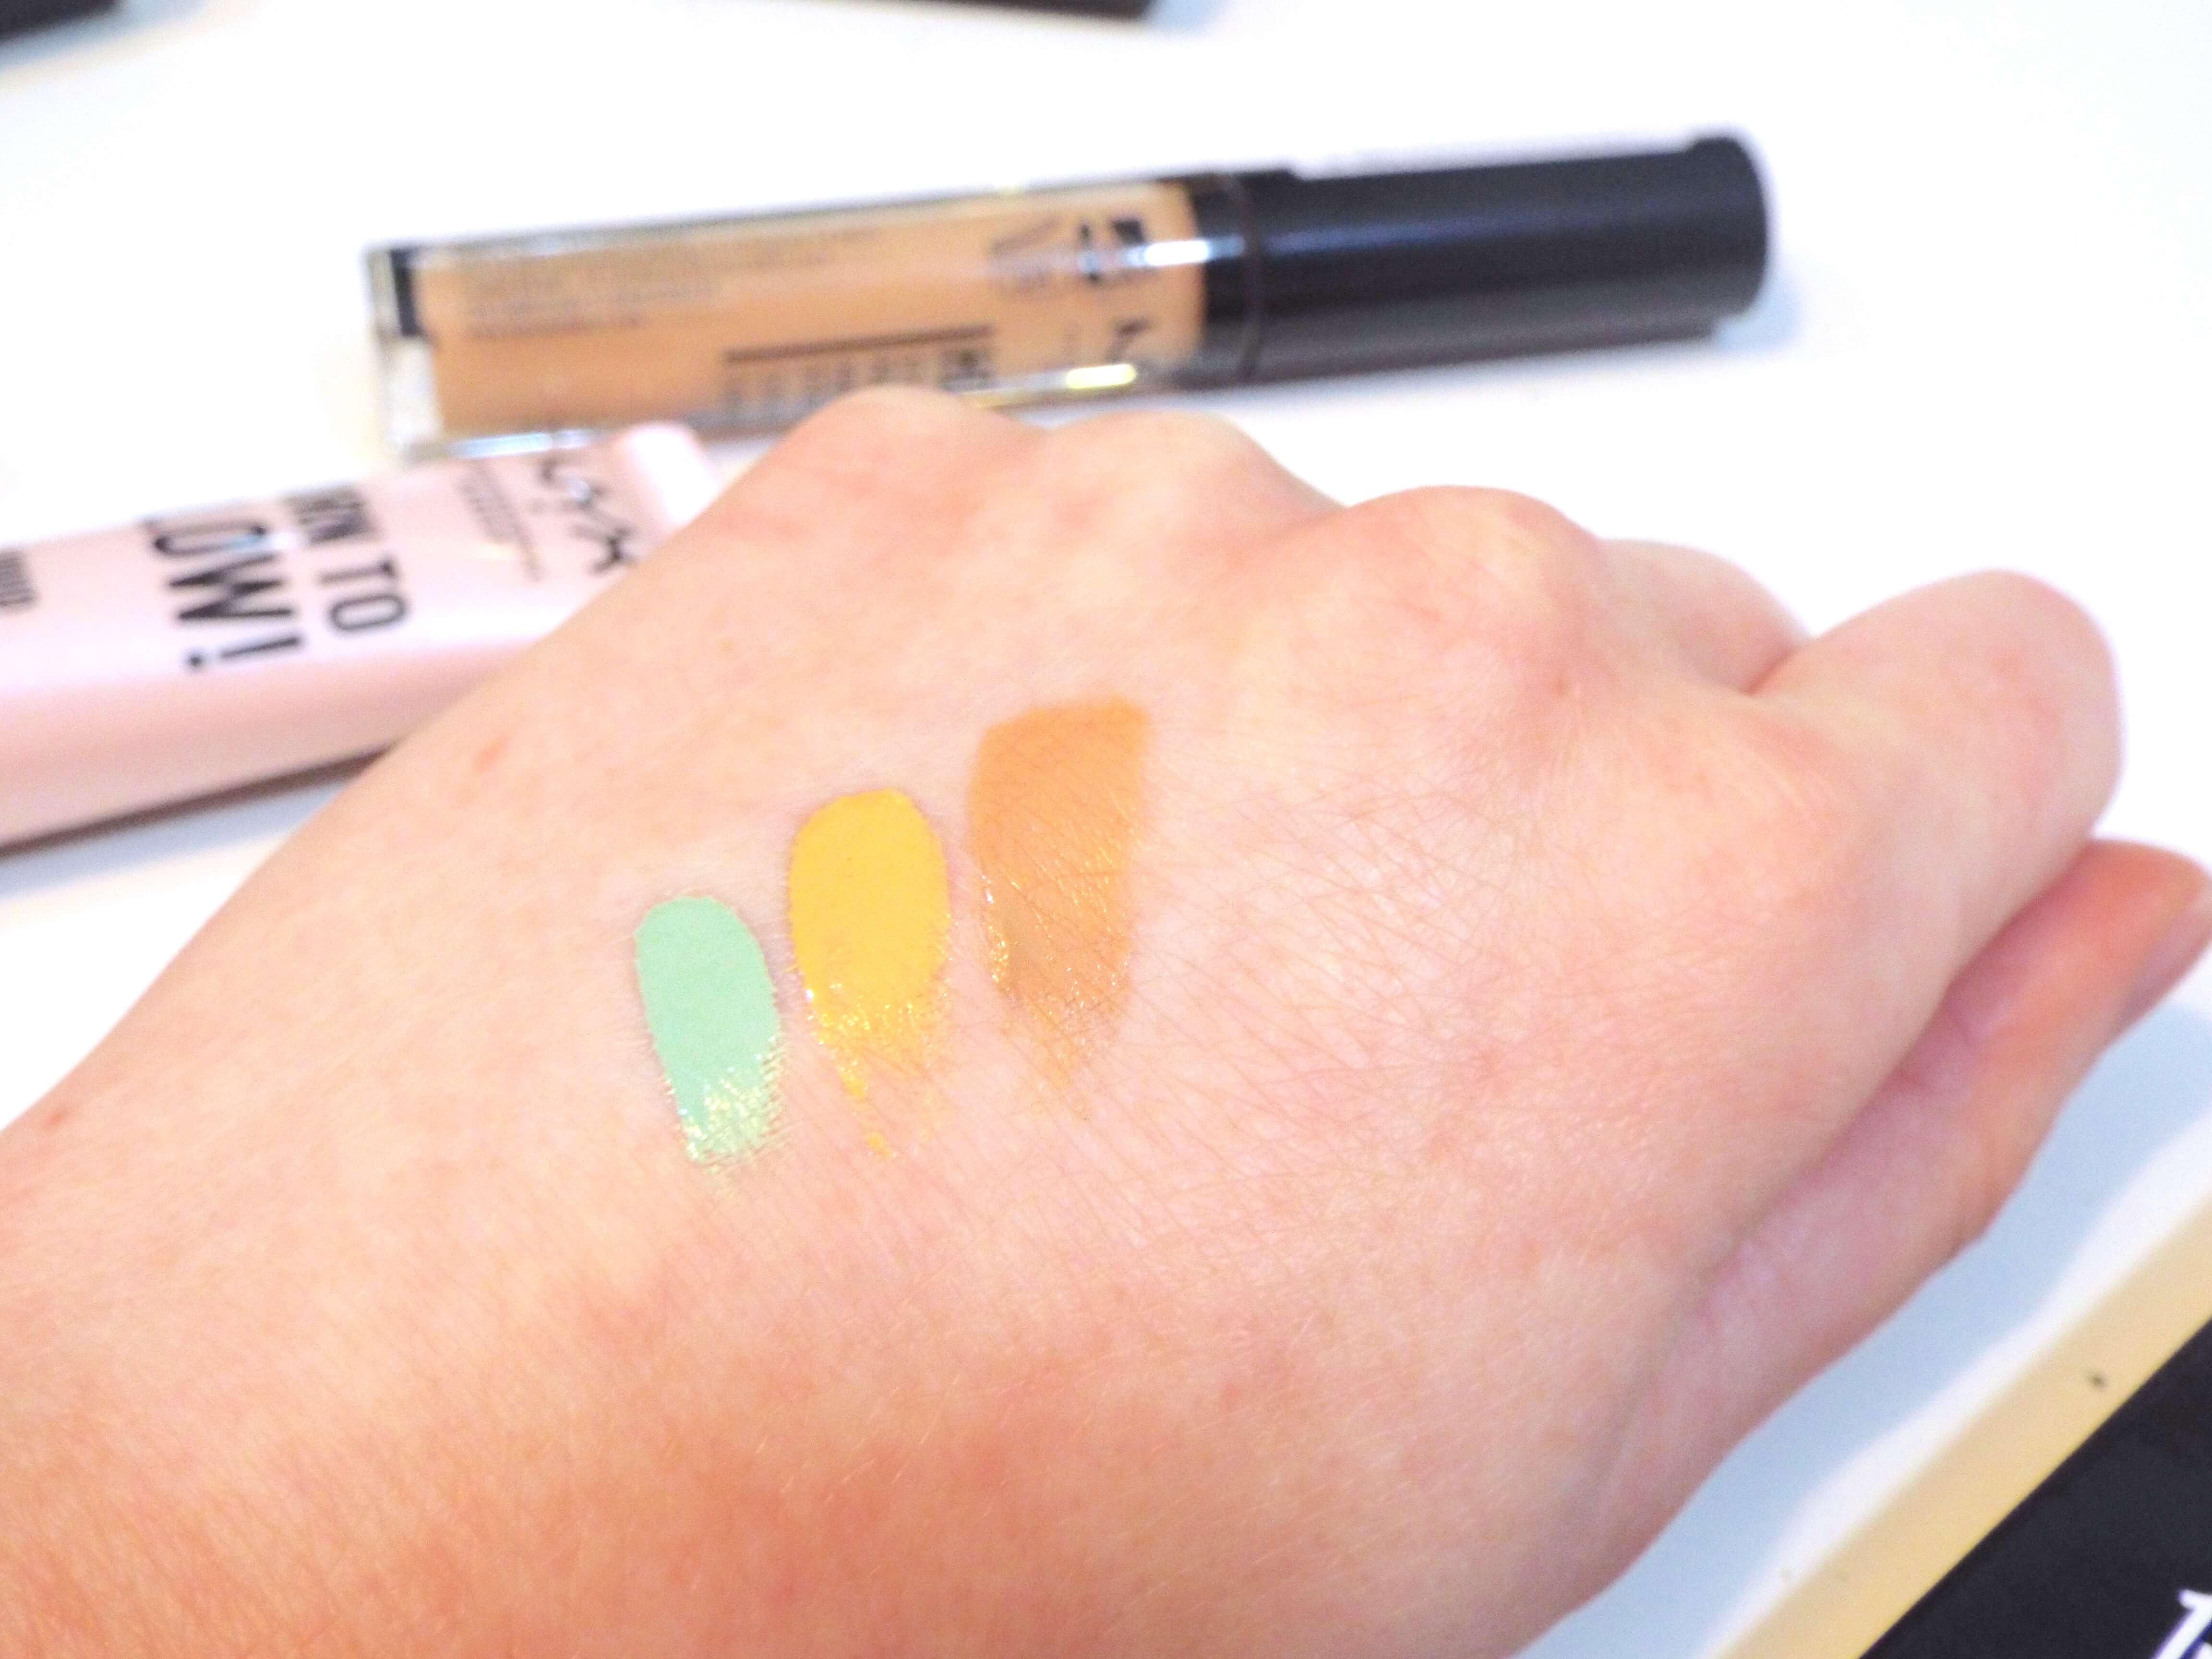 The three NYX HD Concealers swatched, from green to yellow and finally a deep nude shade.